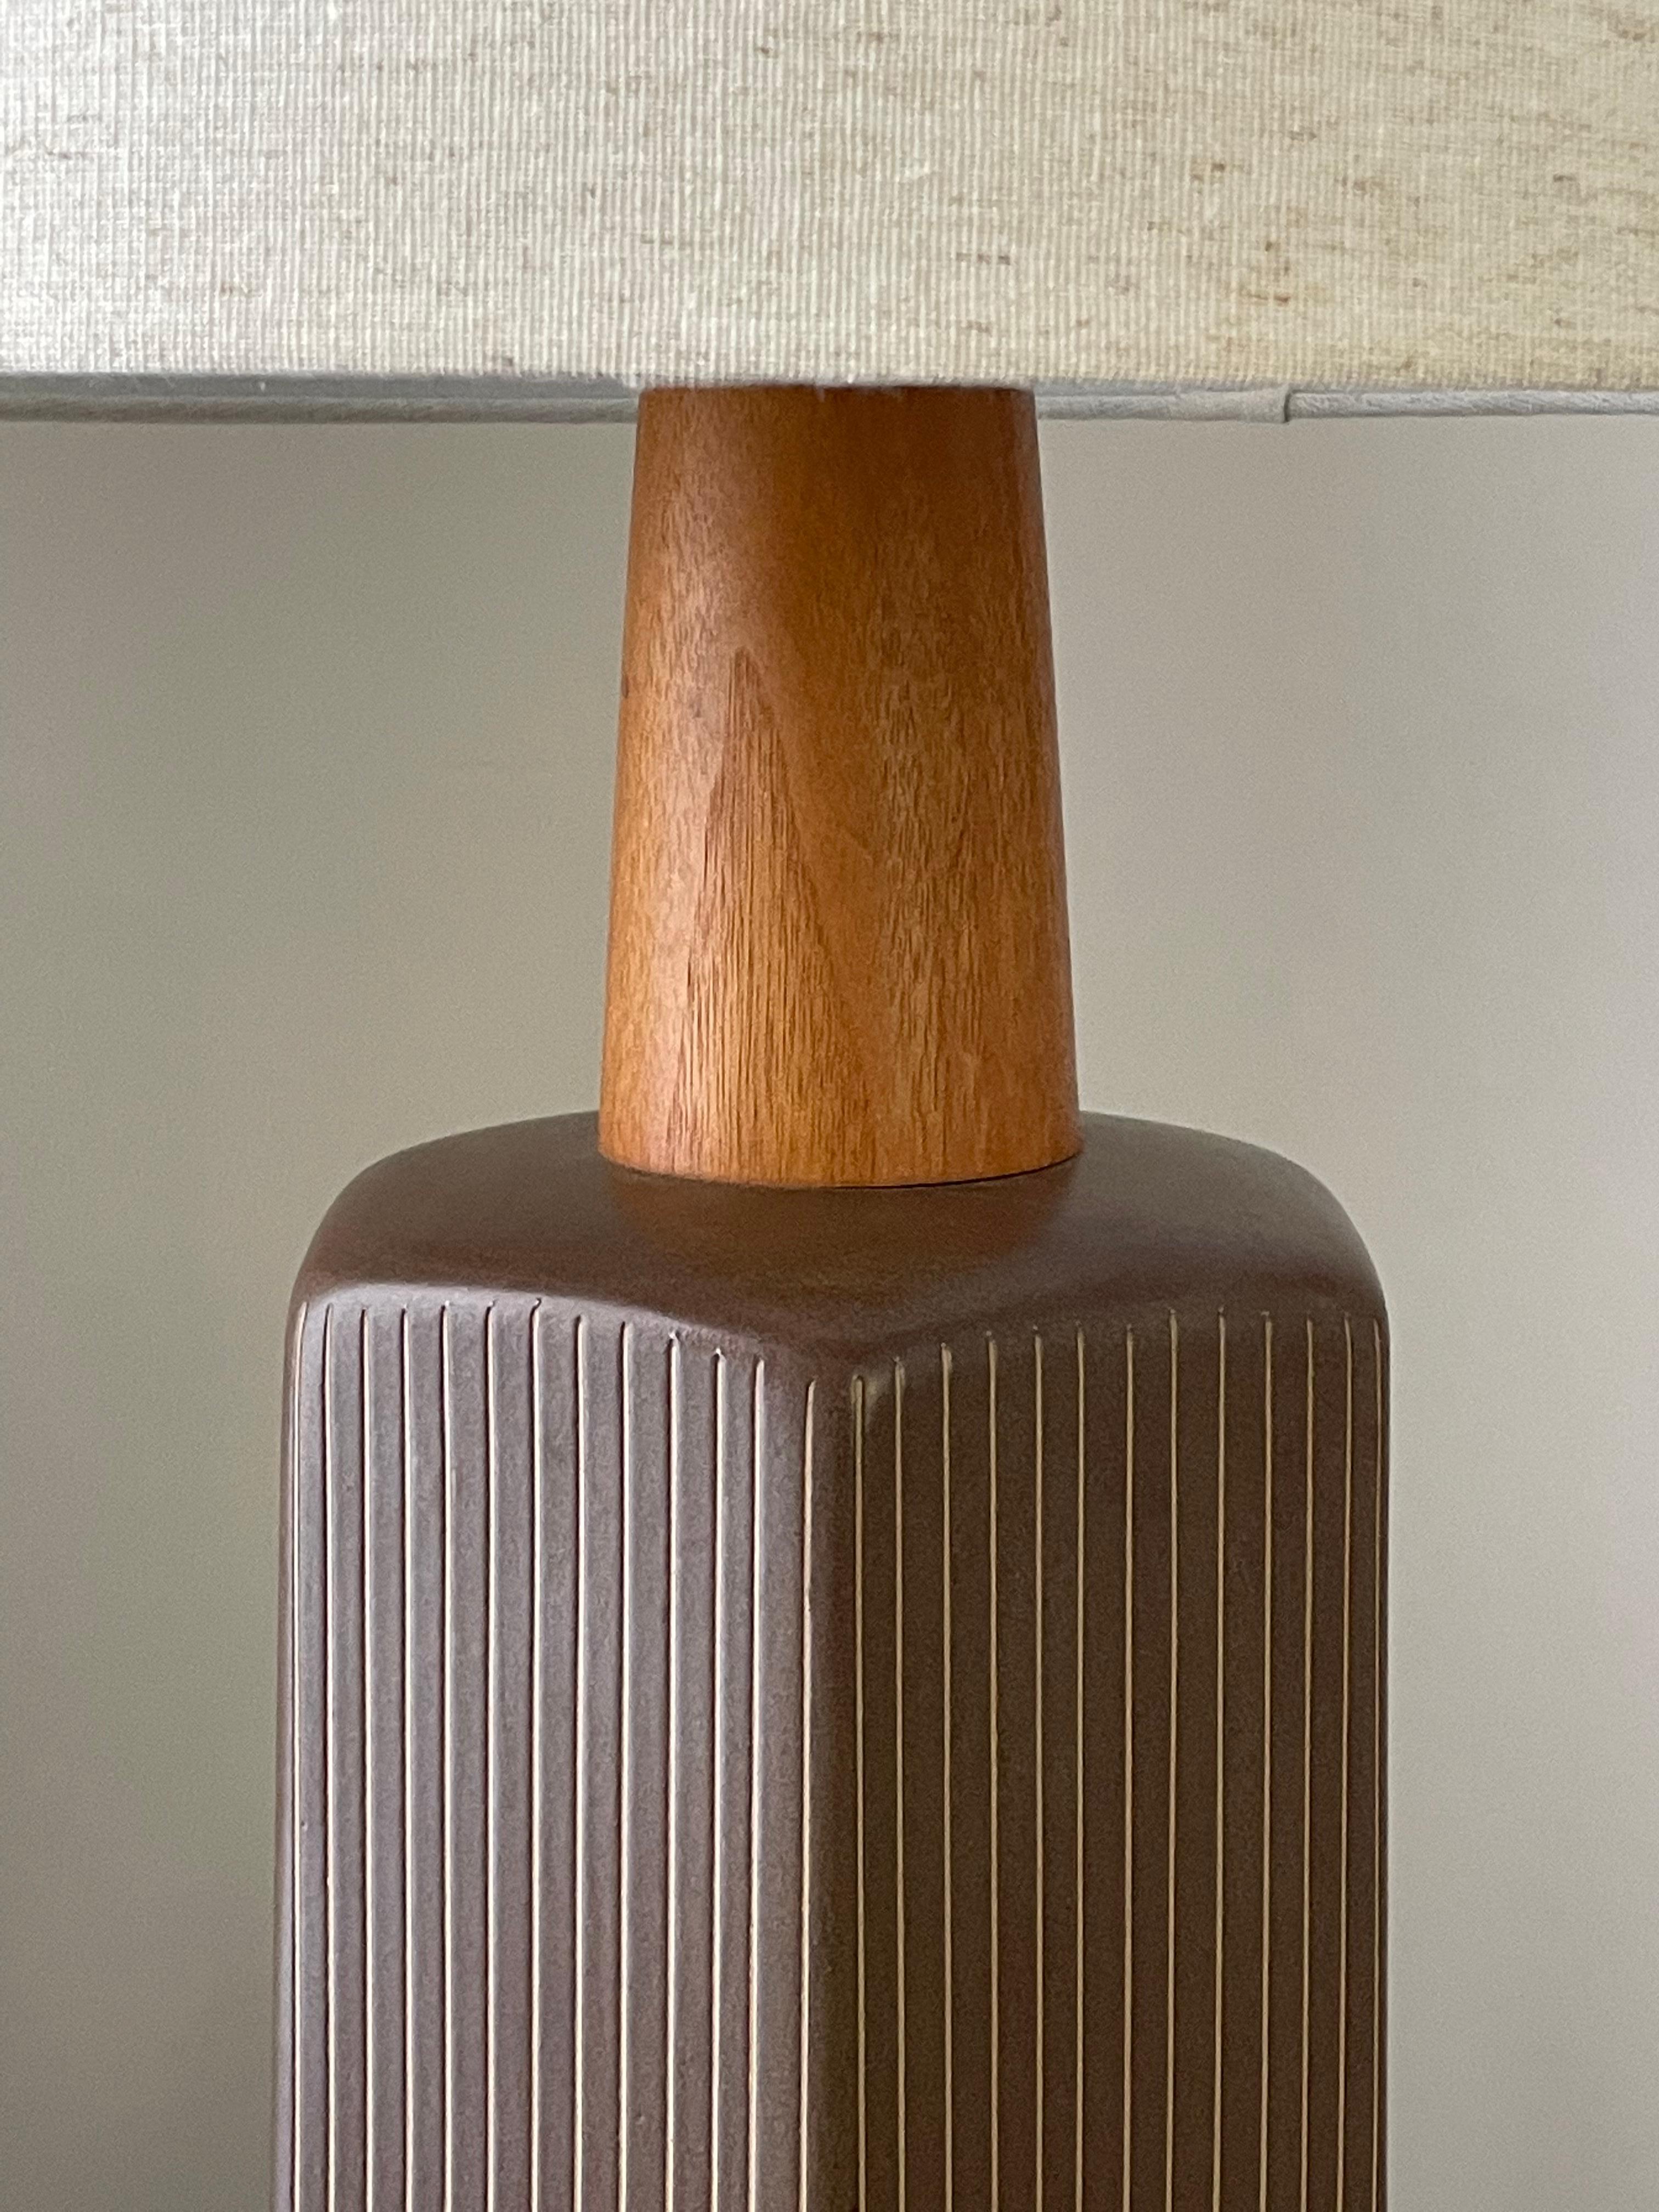 Wonderful minimalist table lamp in ceramic by famed ceramicist duo Jane and Gordon Martz for Marshall Studios. Features a ceramic hexagon base accentuated with a thick walnut neck and finial. Color is a brown with slight green and purple